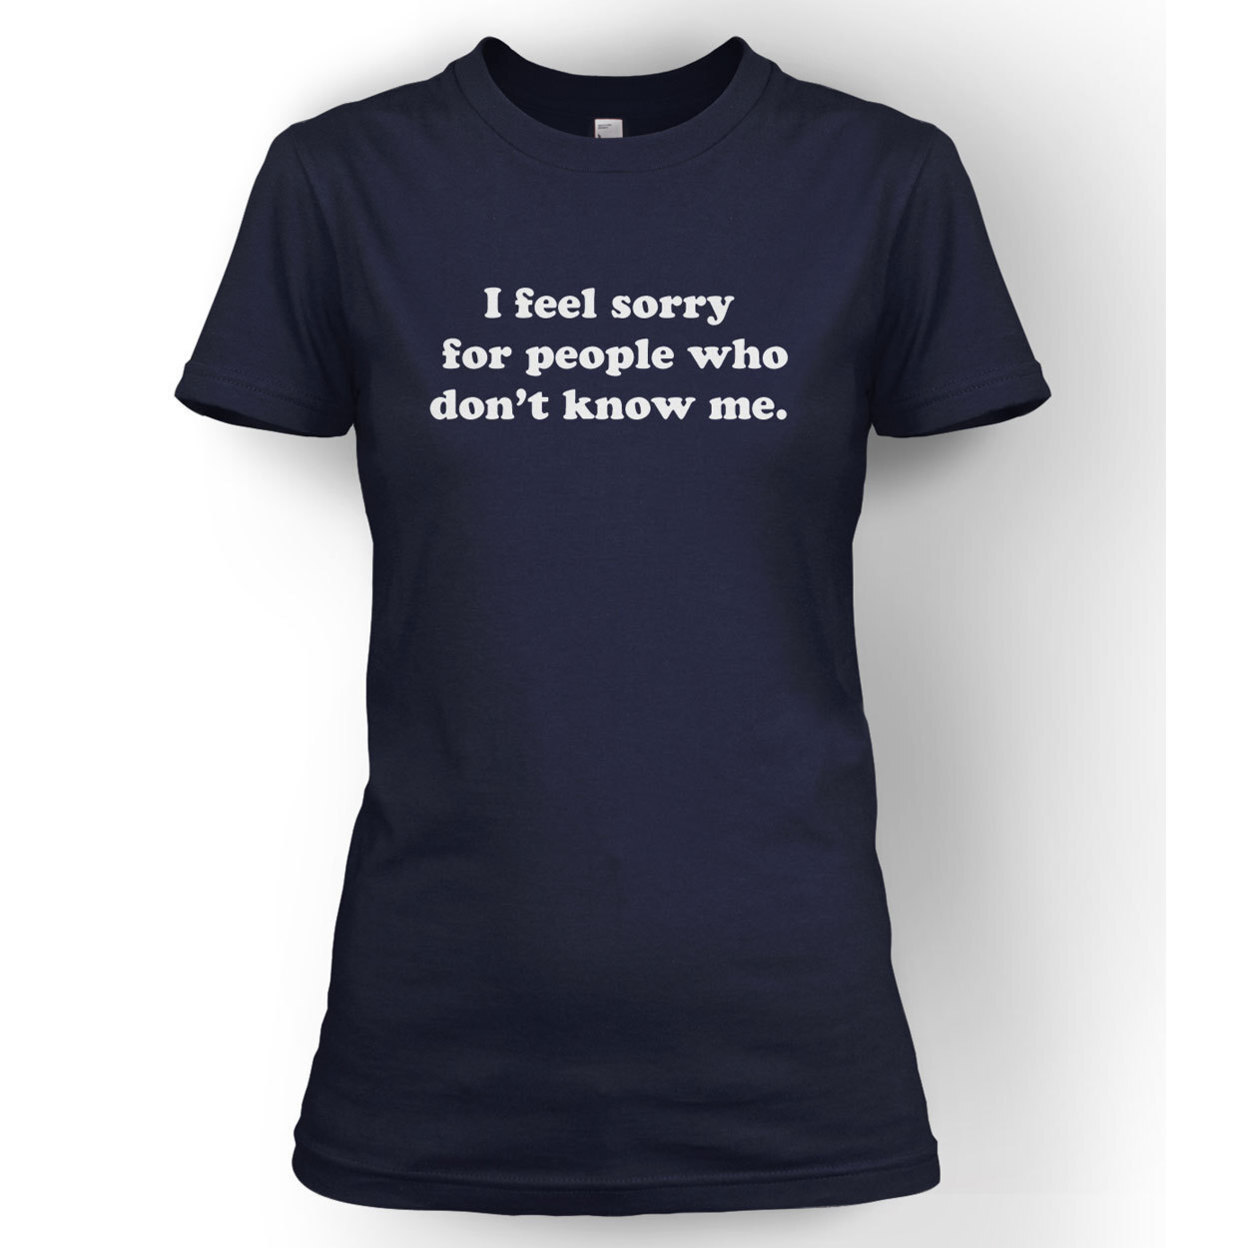 Buy I Feel Sorry for People Shirt by Crazy Dog Tshirts on OpenSky